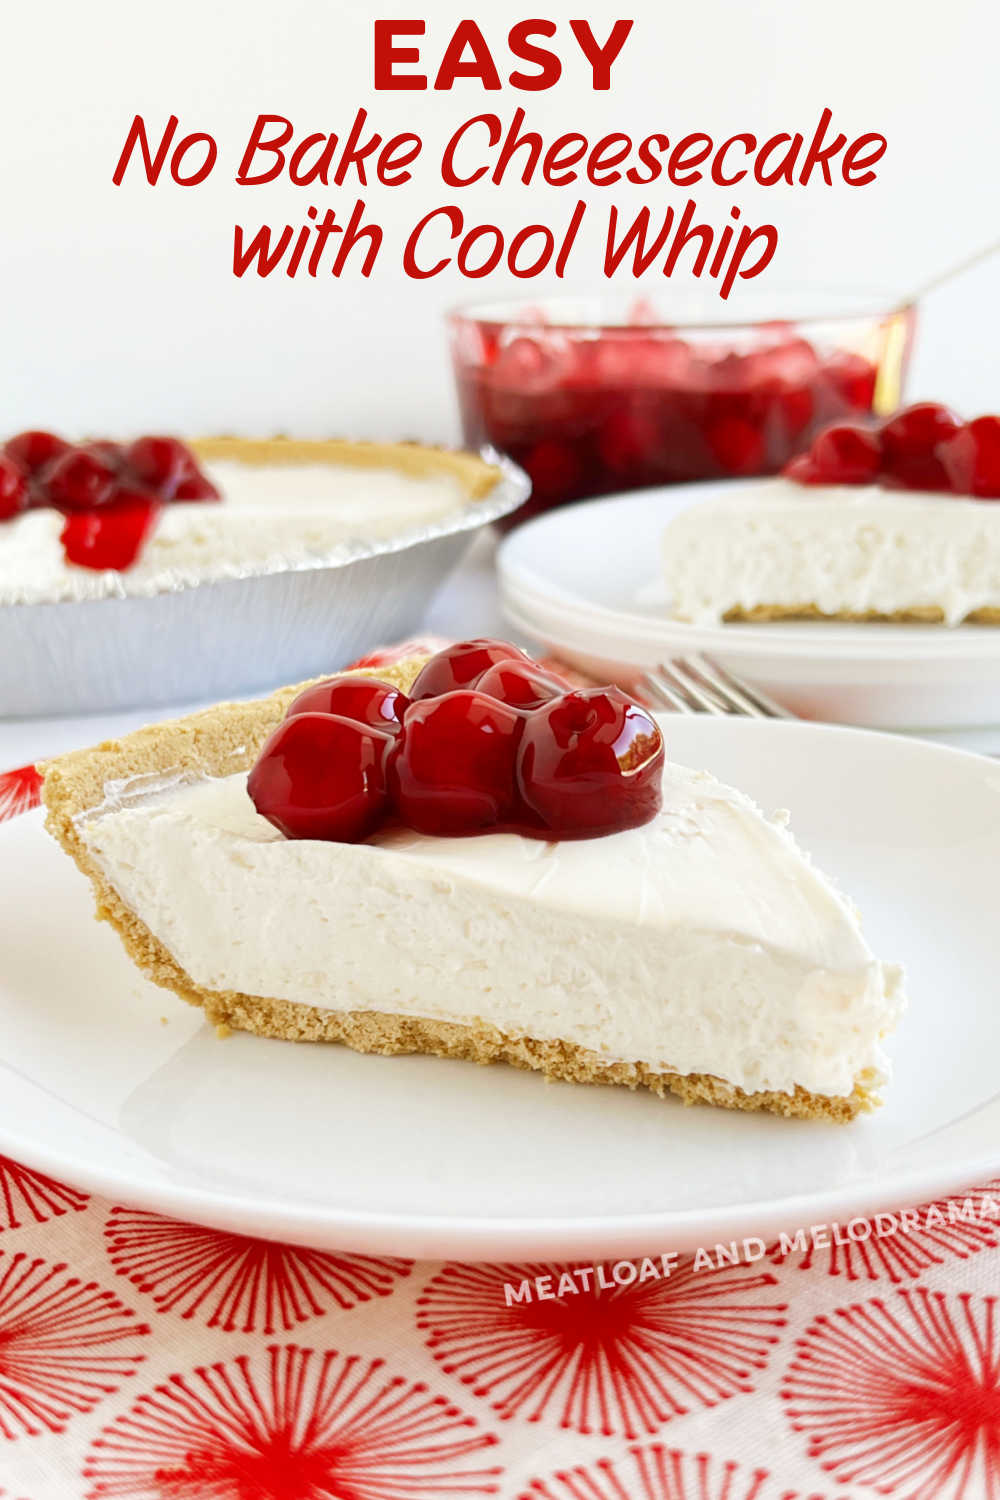 No Bake Cheesecake with Cool Whip is an easy no bake cheesecake recipe with cream cheese, sugar and Cool Whip. The perfect dessert to share at family gatherings, holidays or summer cookouts!  via @meamel